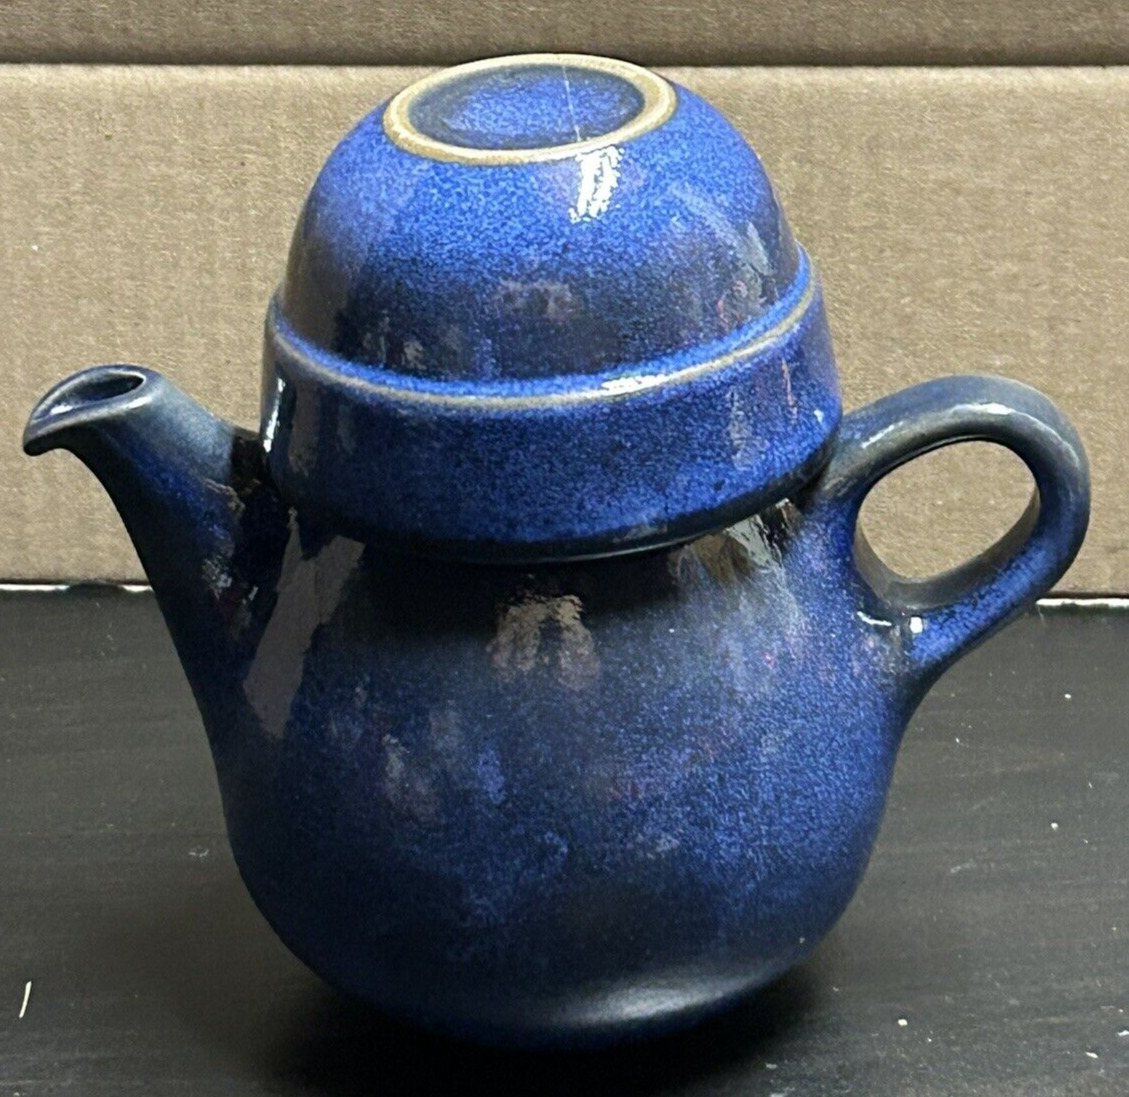 Heath Ceramic Teapot With Cup, Stopper